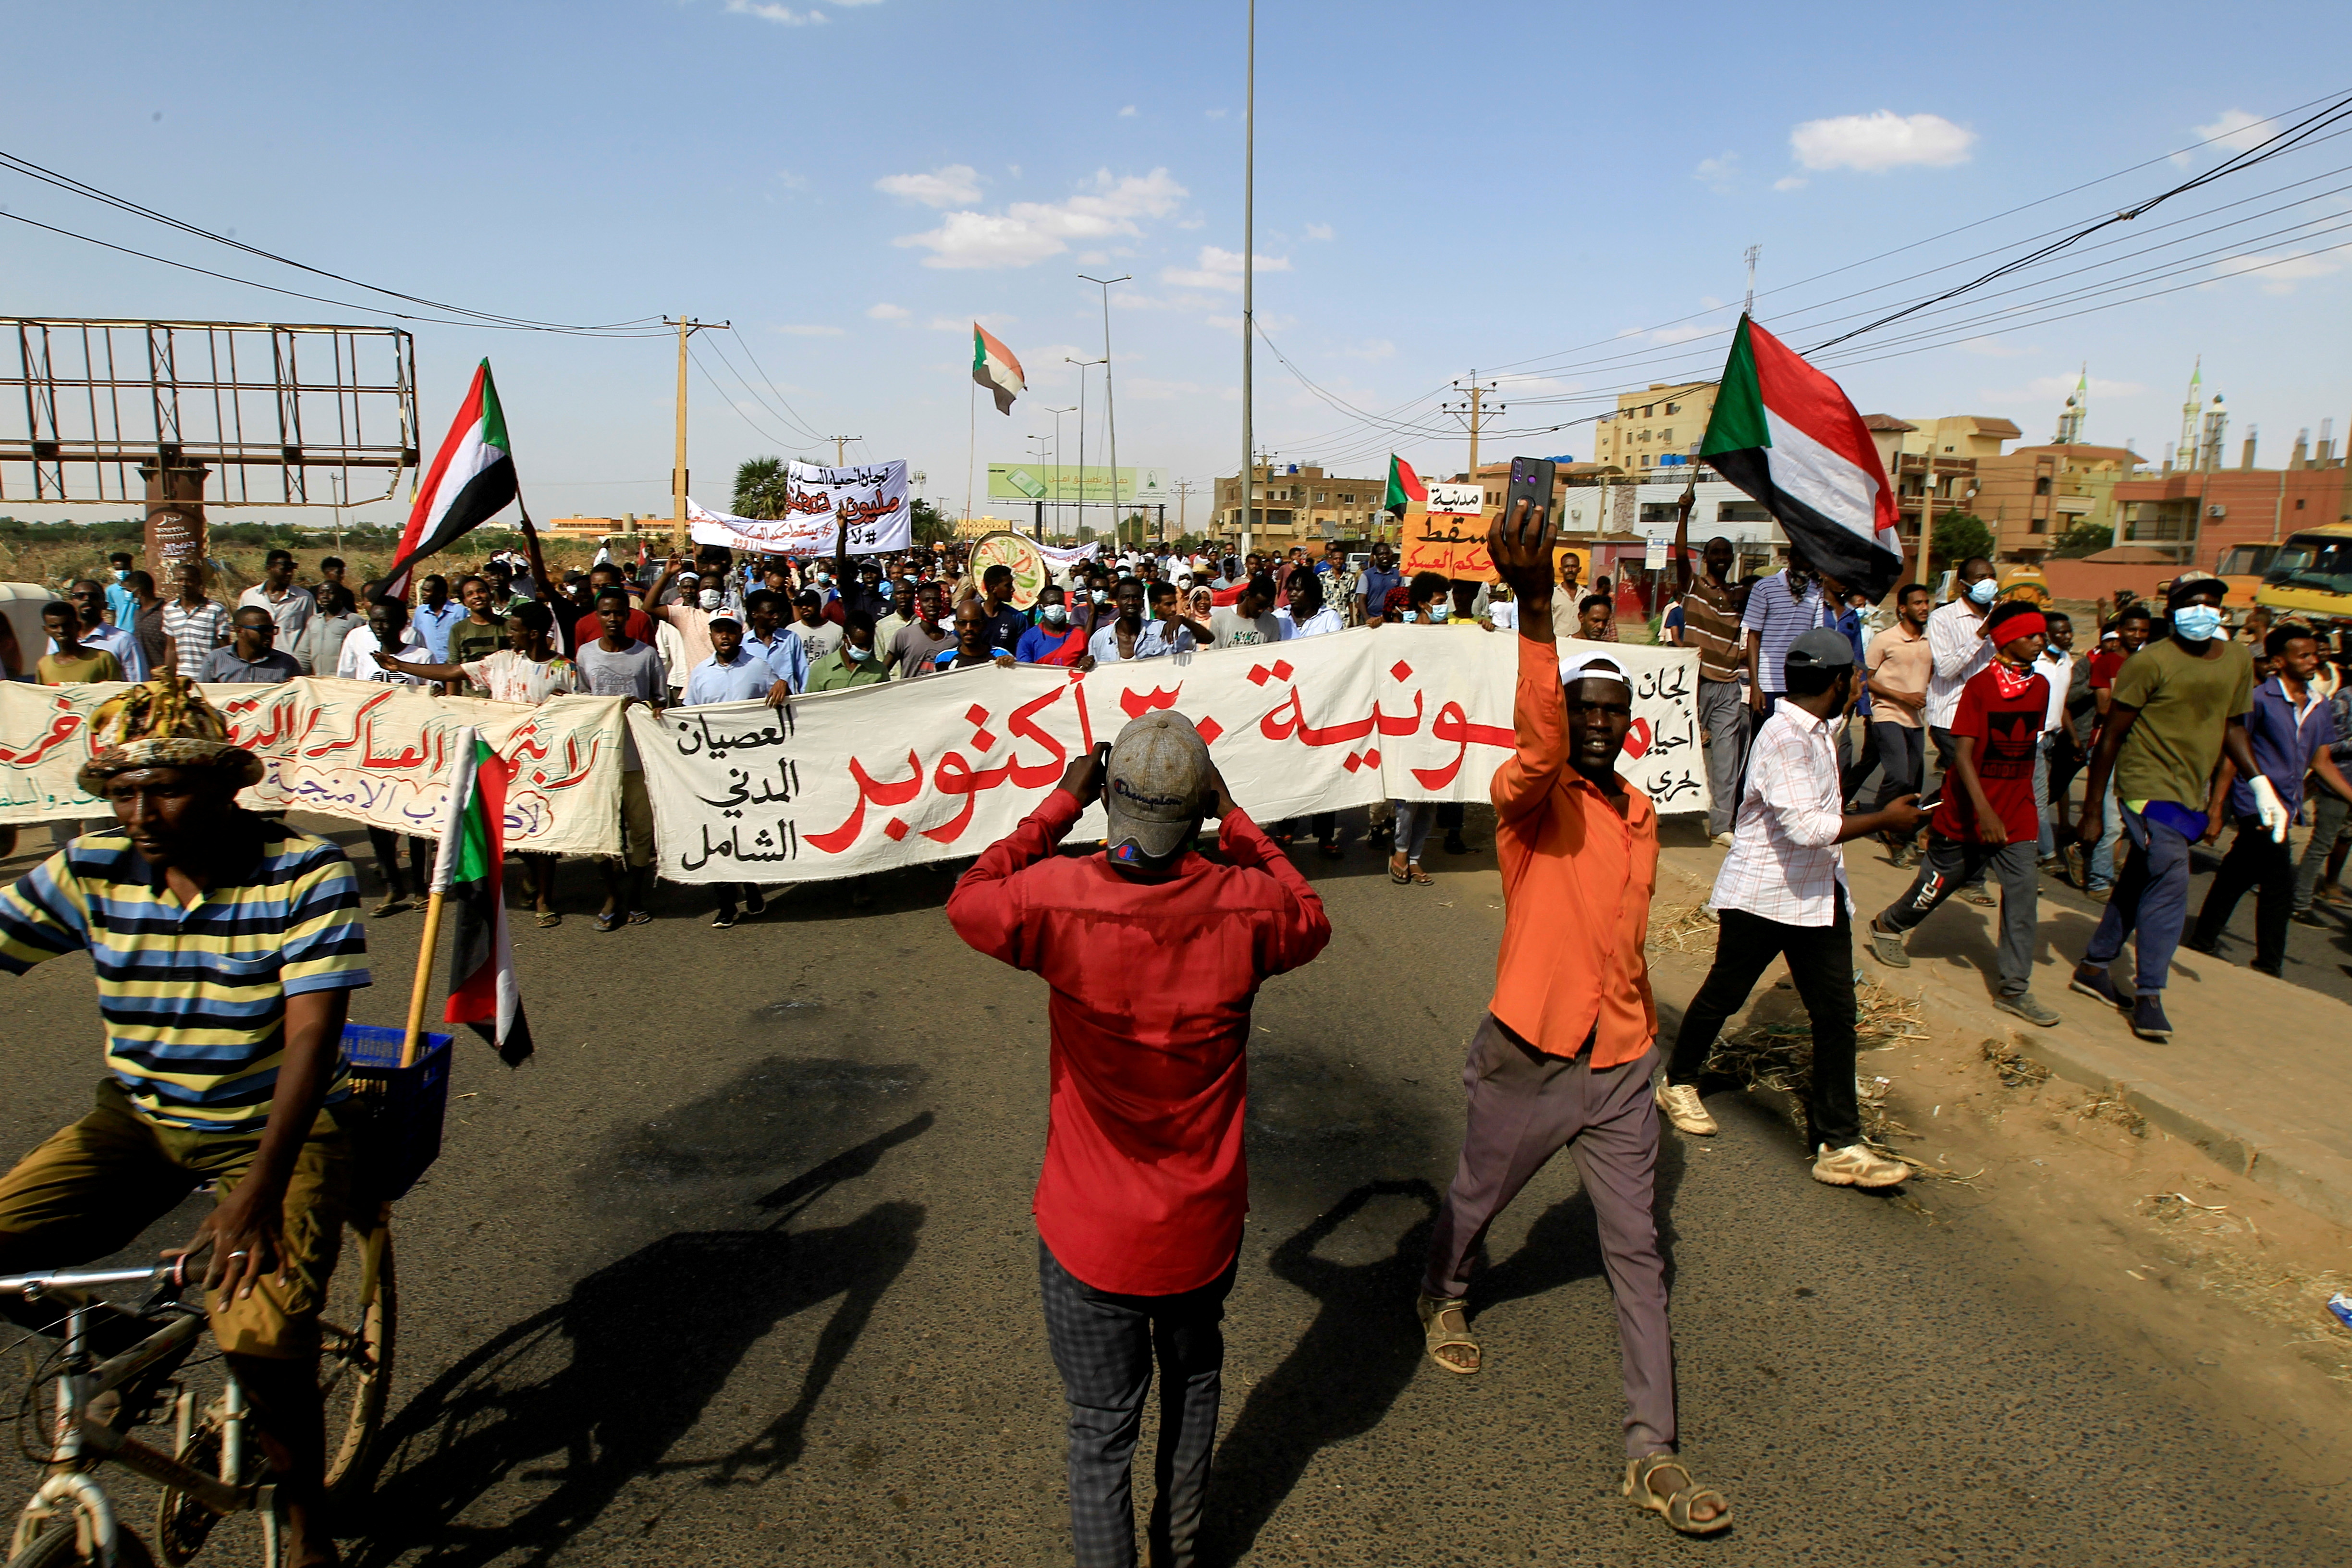  Protesters carry a banner and national flags as they march against the Sudanese military's recent seizure of power and ousting of the civilian government, in the streets of the capital Khartoum, Sudan October 30, 2021. REUTERS/Mohamed Nureldin/File Photo